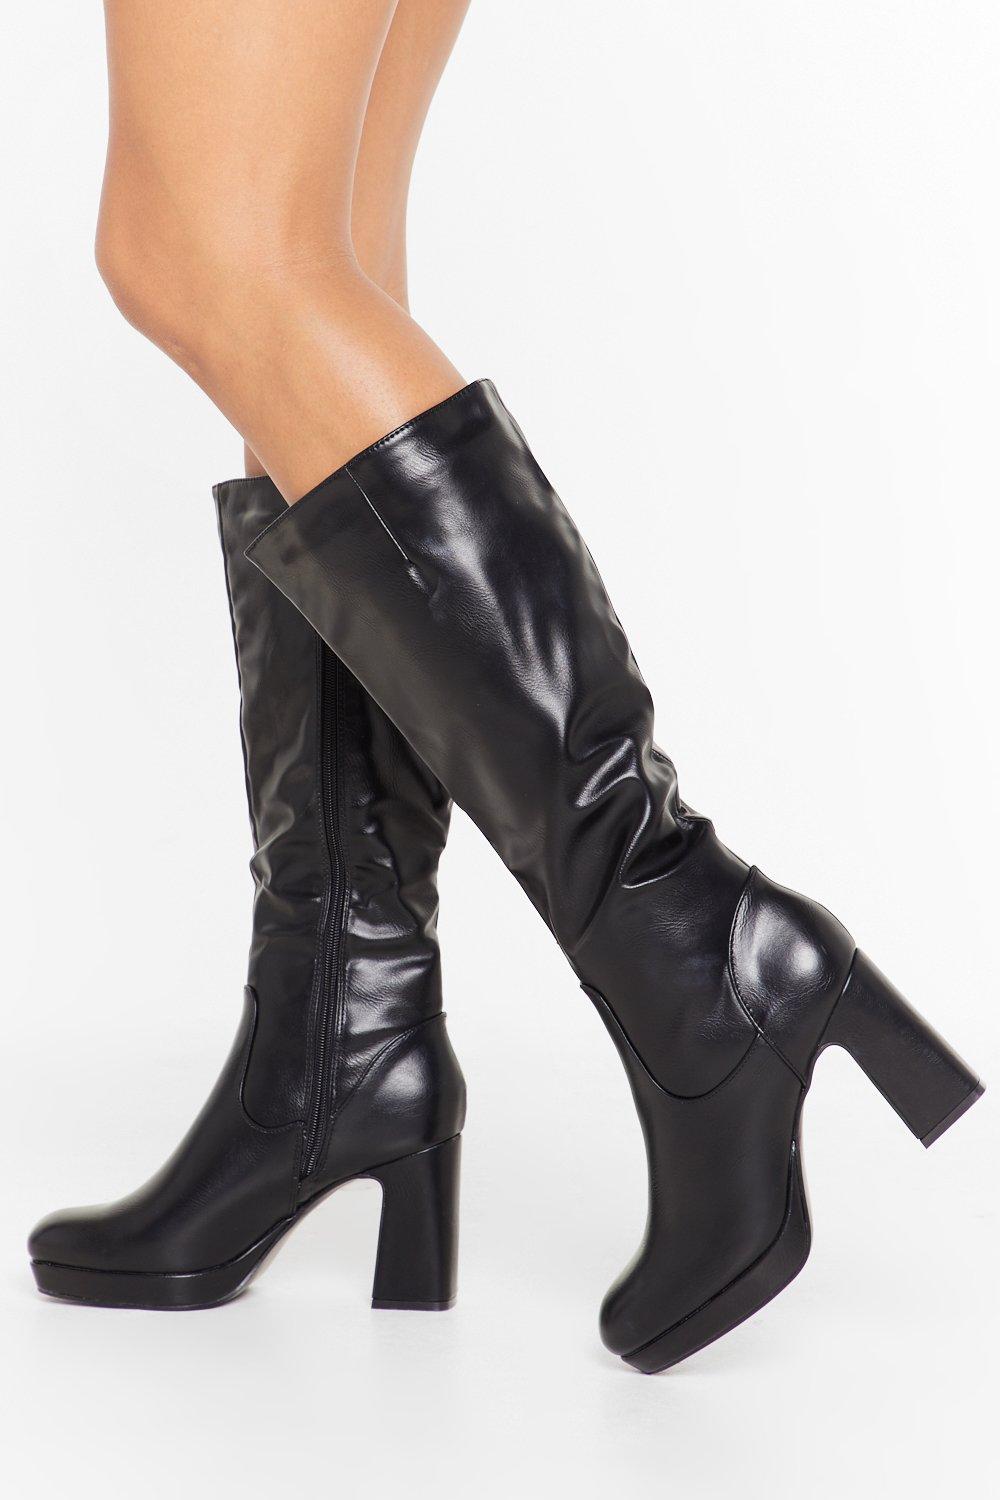 high heel knee high leather boots